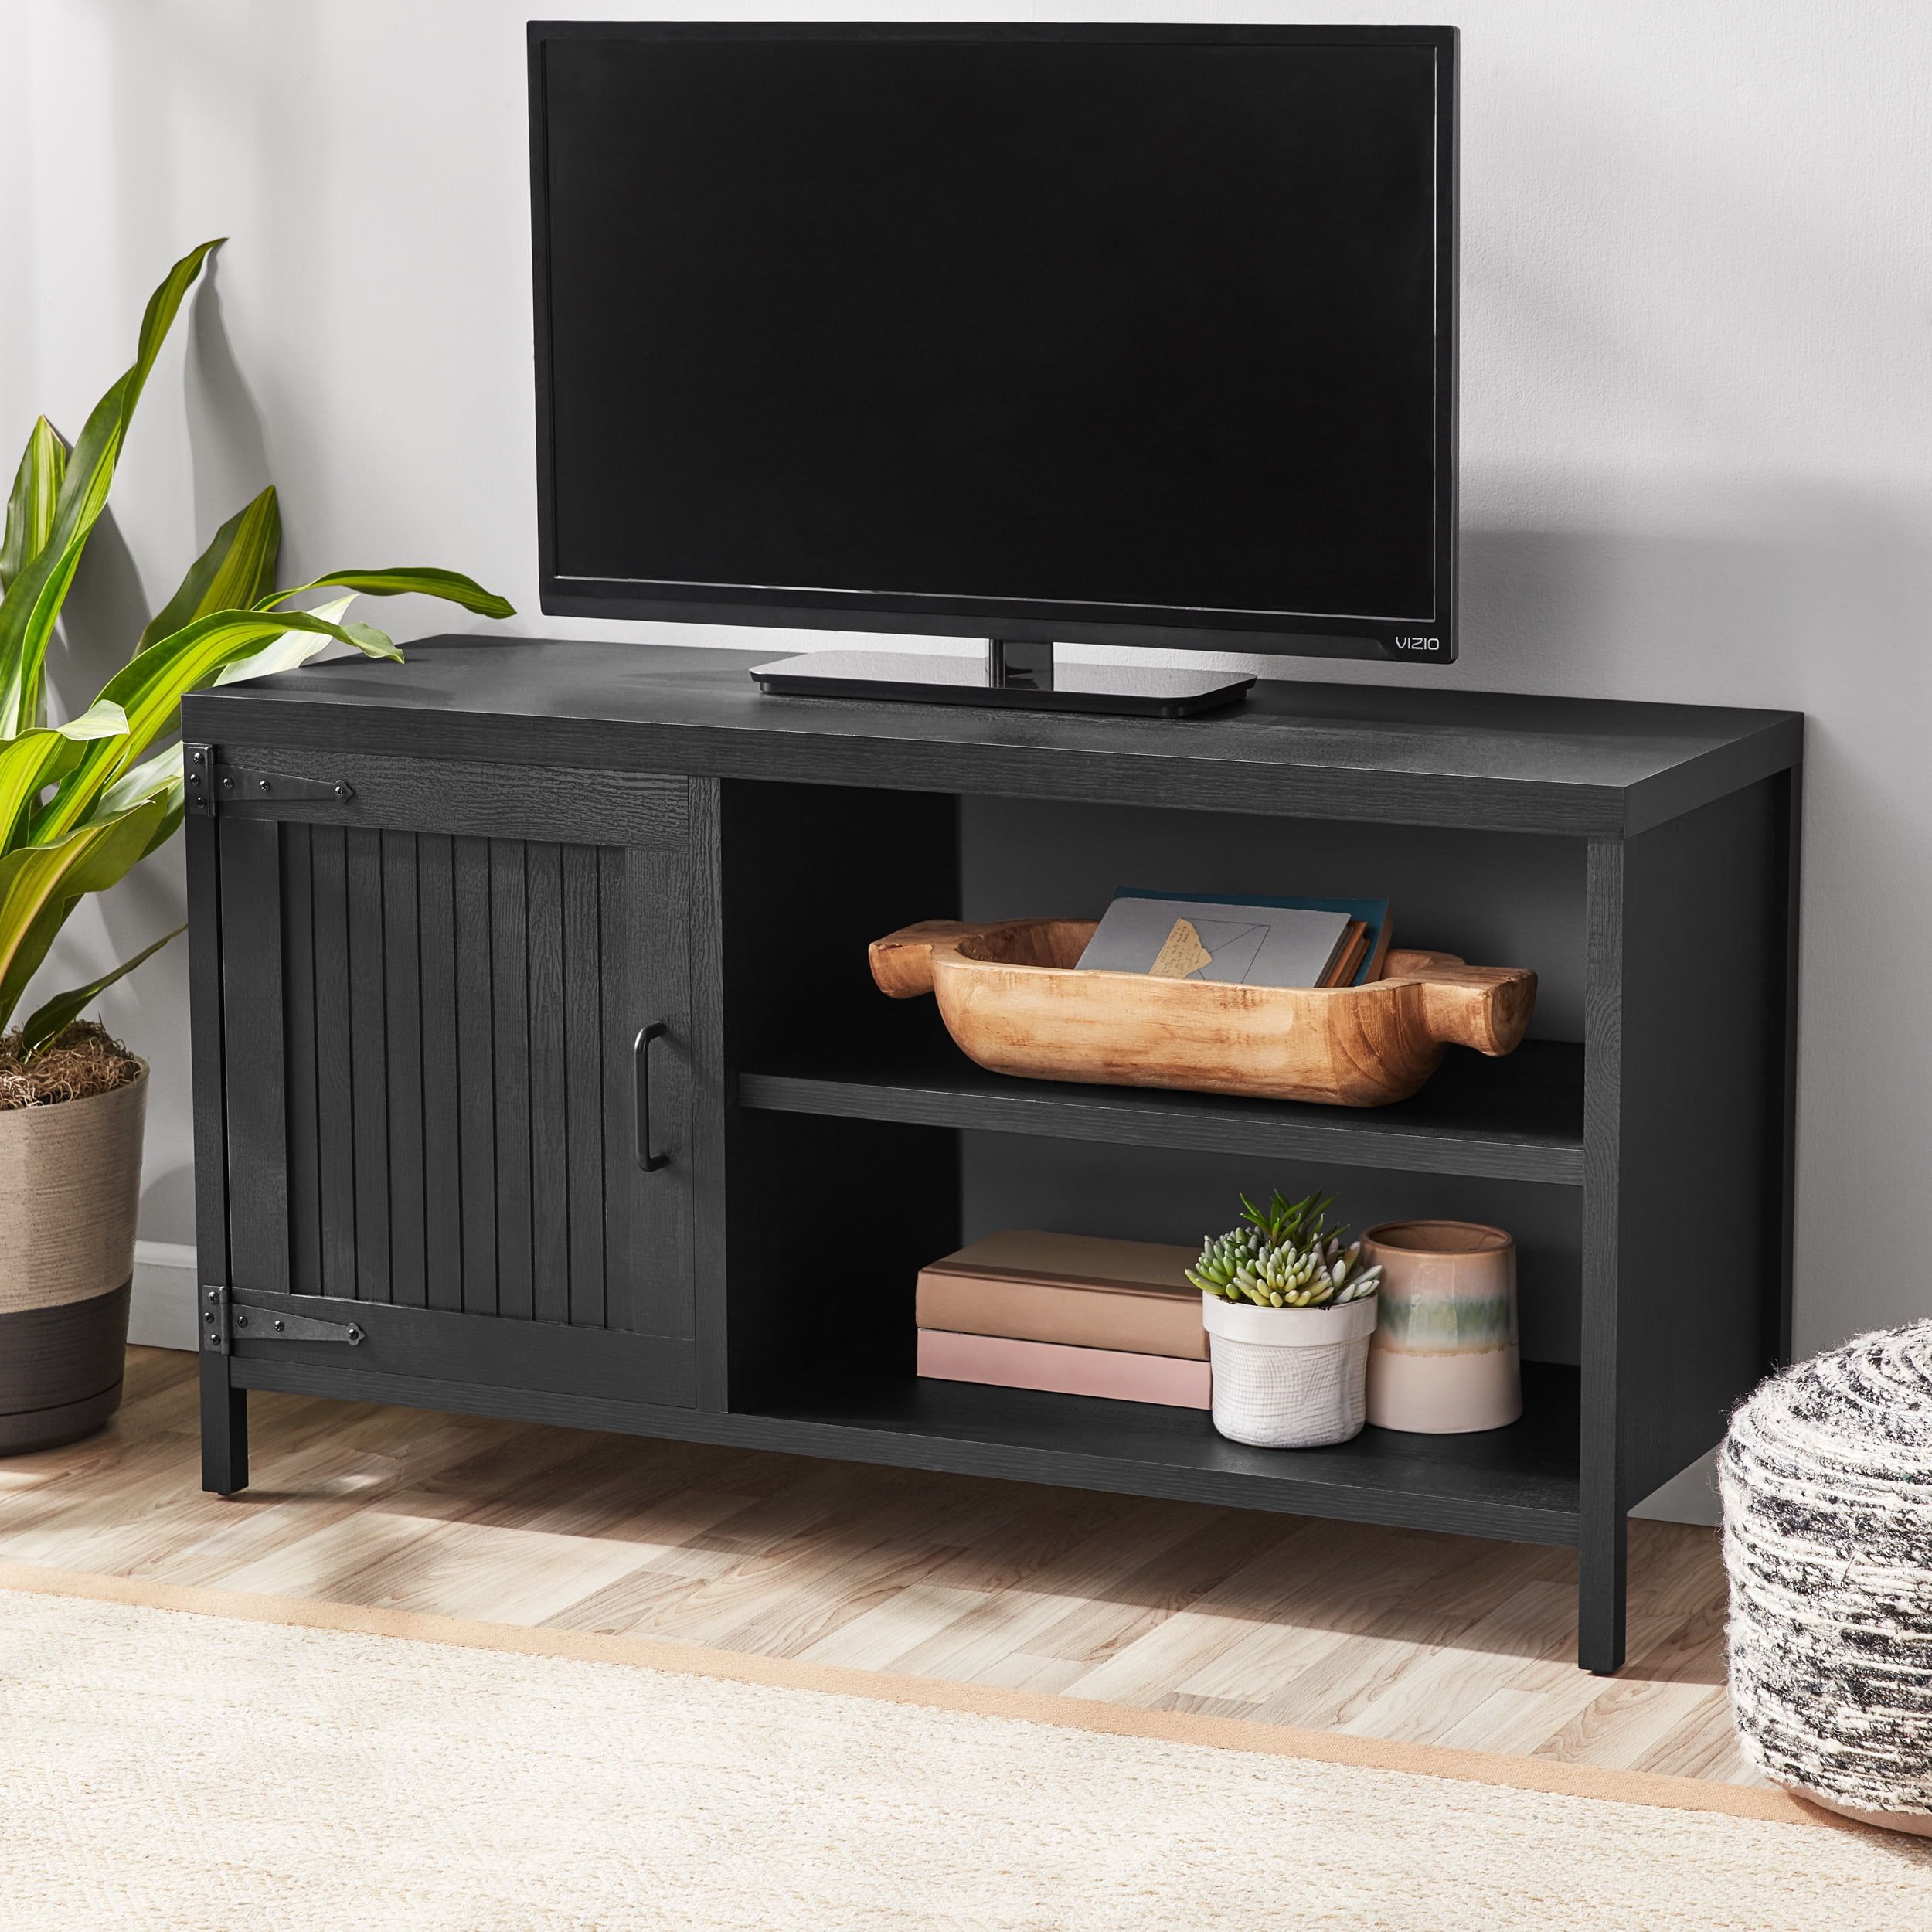 Mainstays Farmhouse Tv Stand For Tvs Up To 50", Black – Walmart For Farmhouse Stands For Tvs (View 9 of 15)